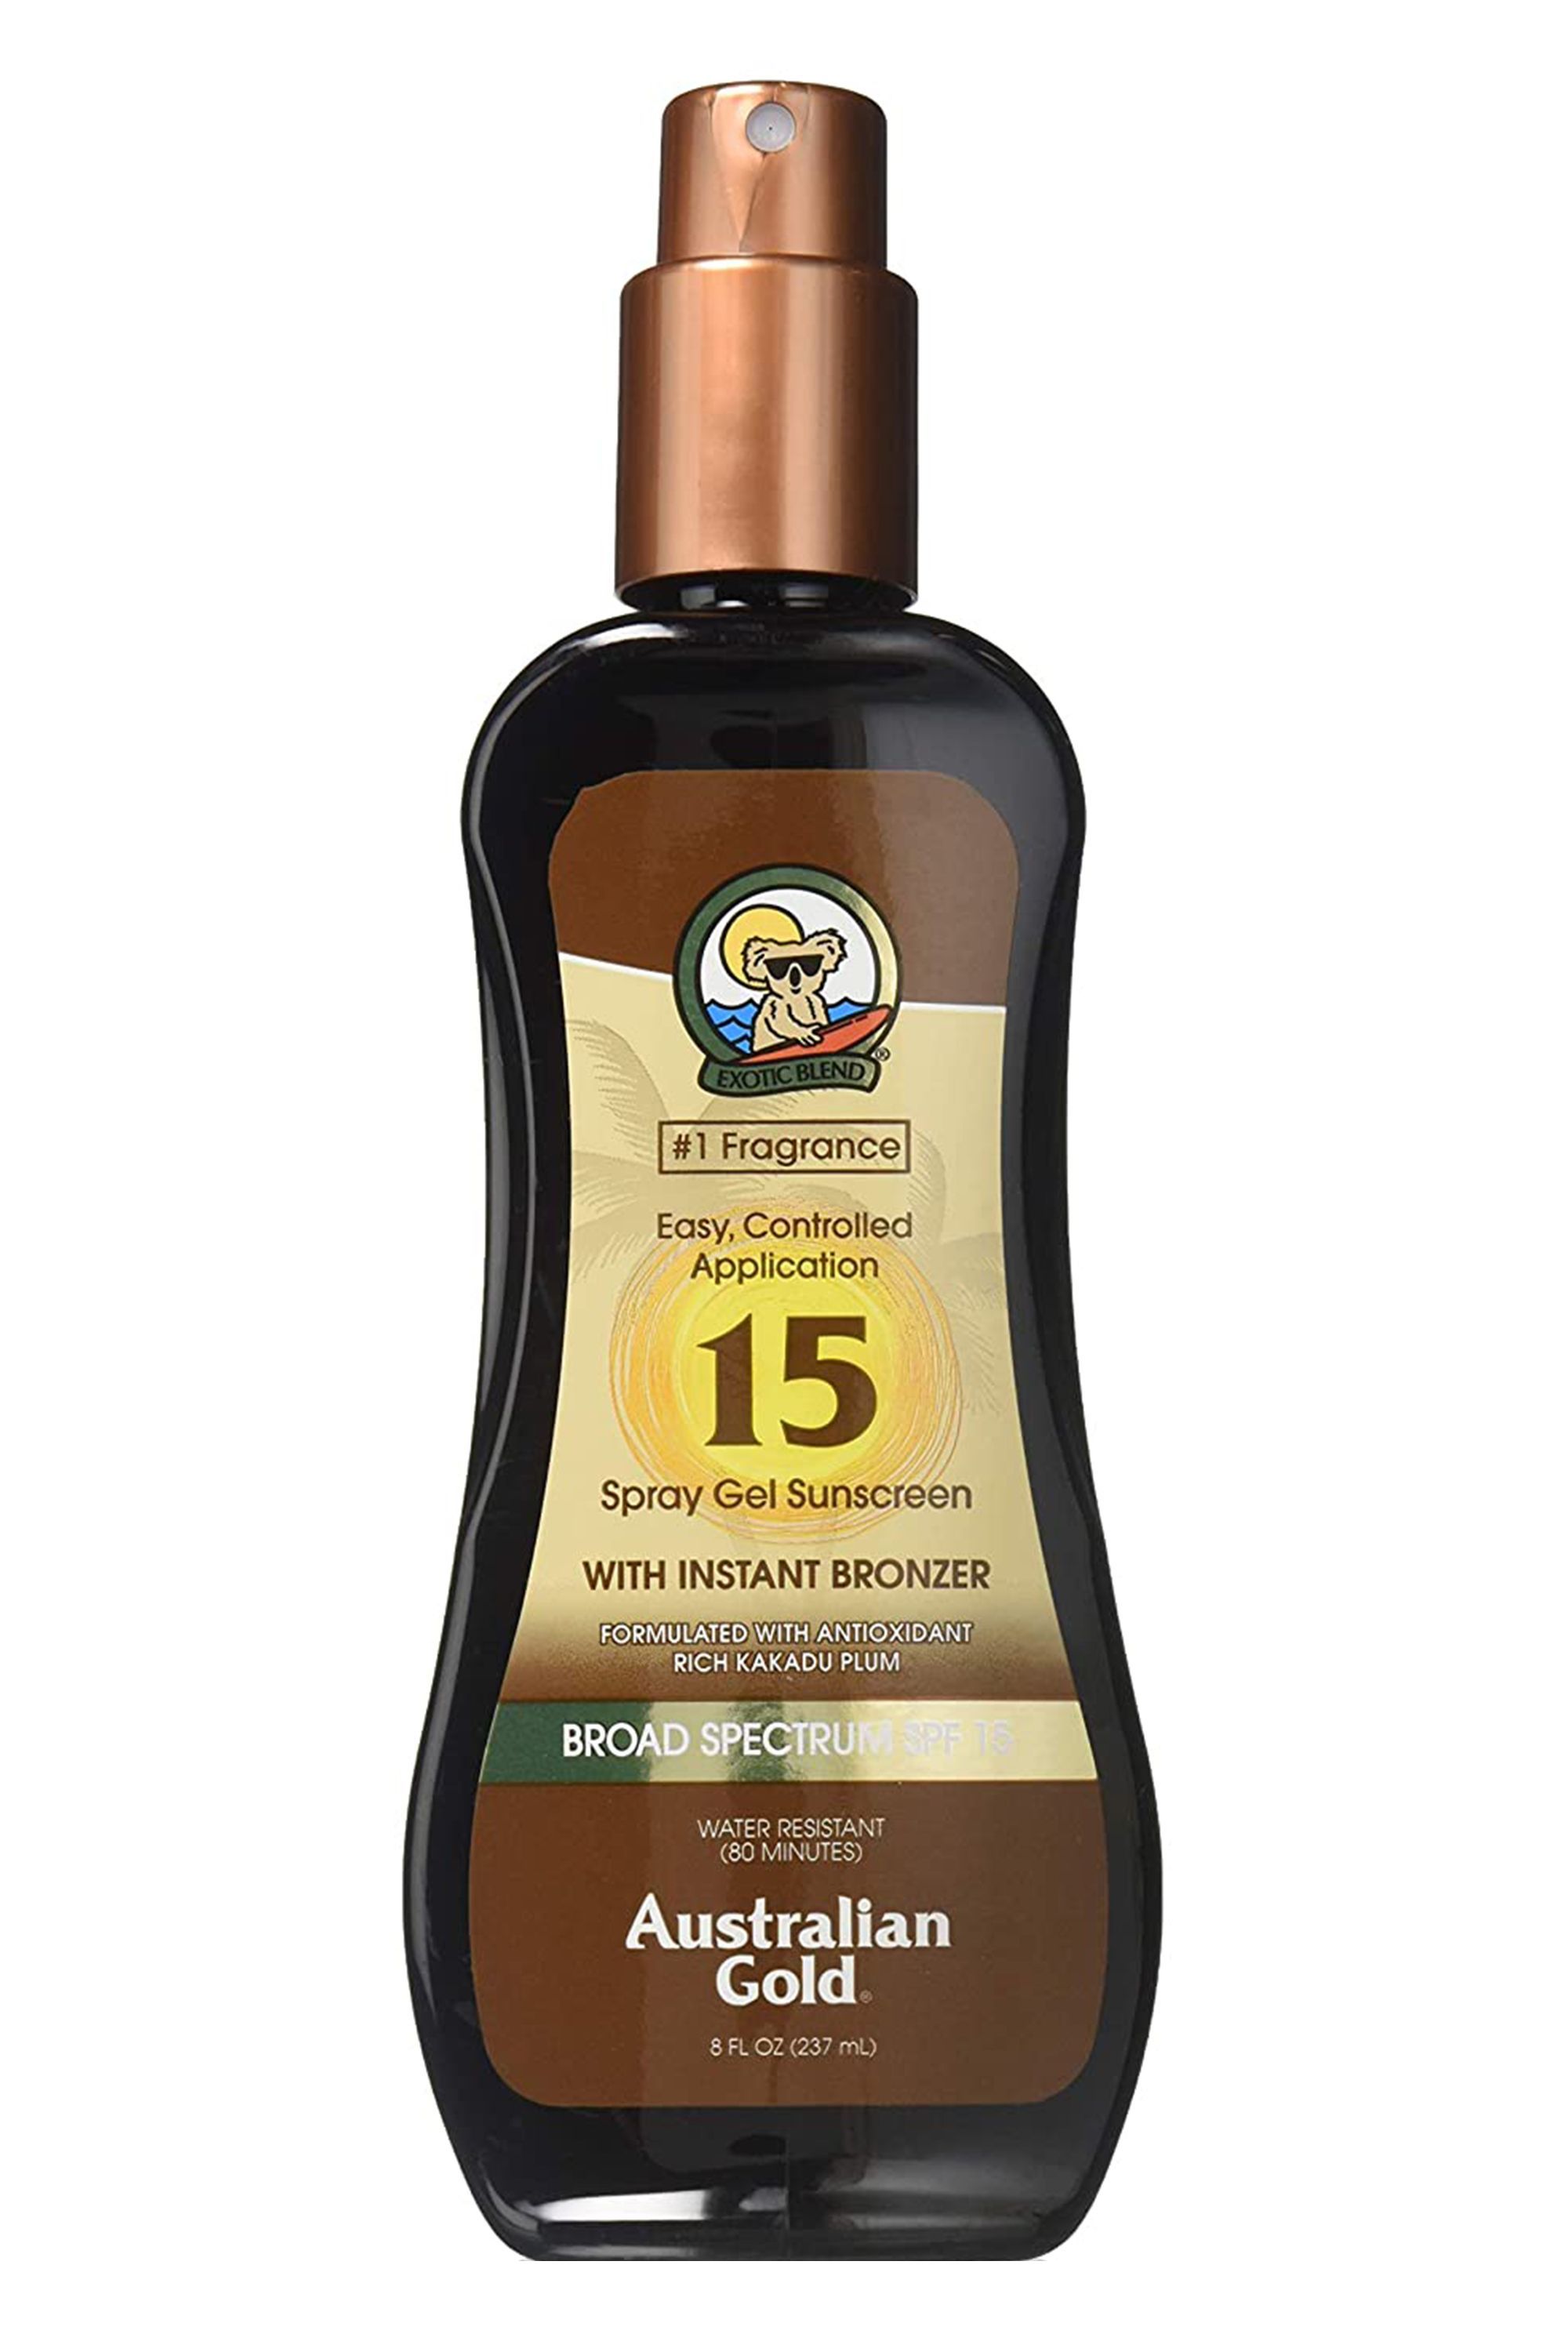 7 Tanning Oils - Best Tanning Products